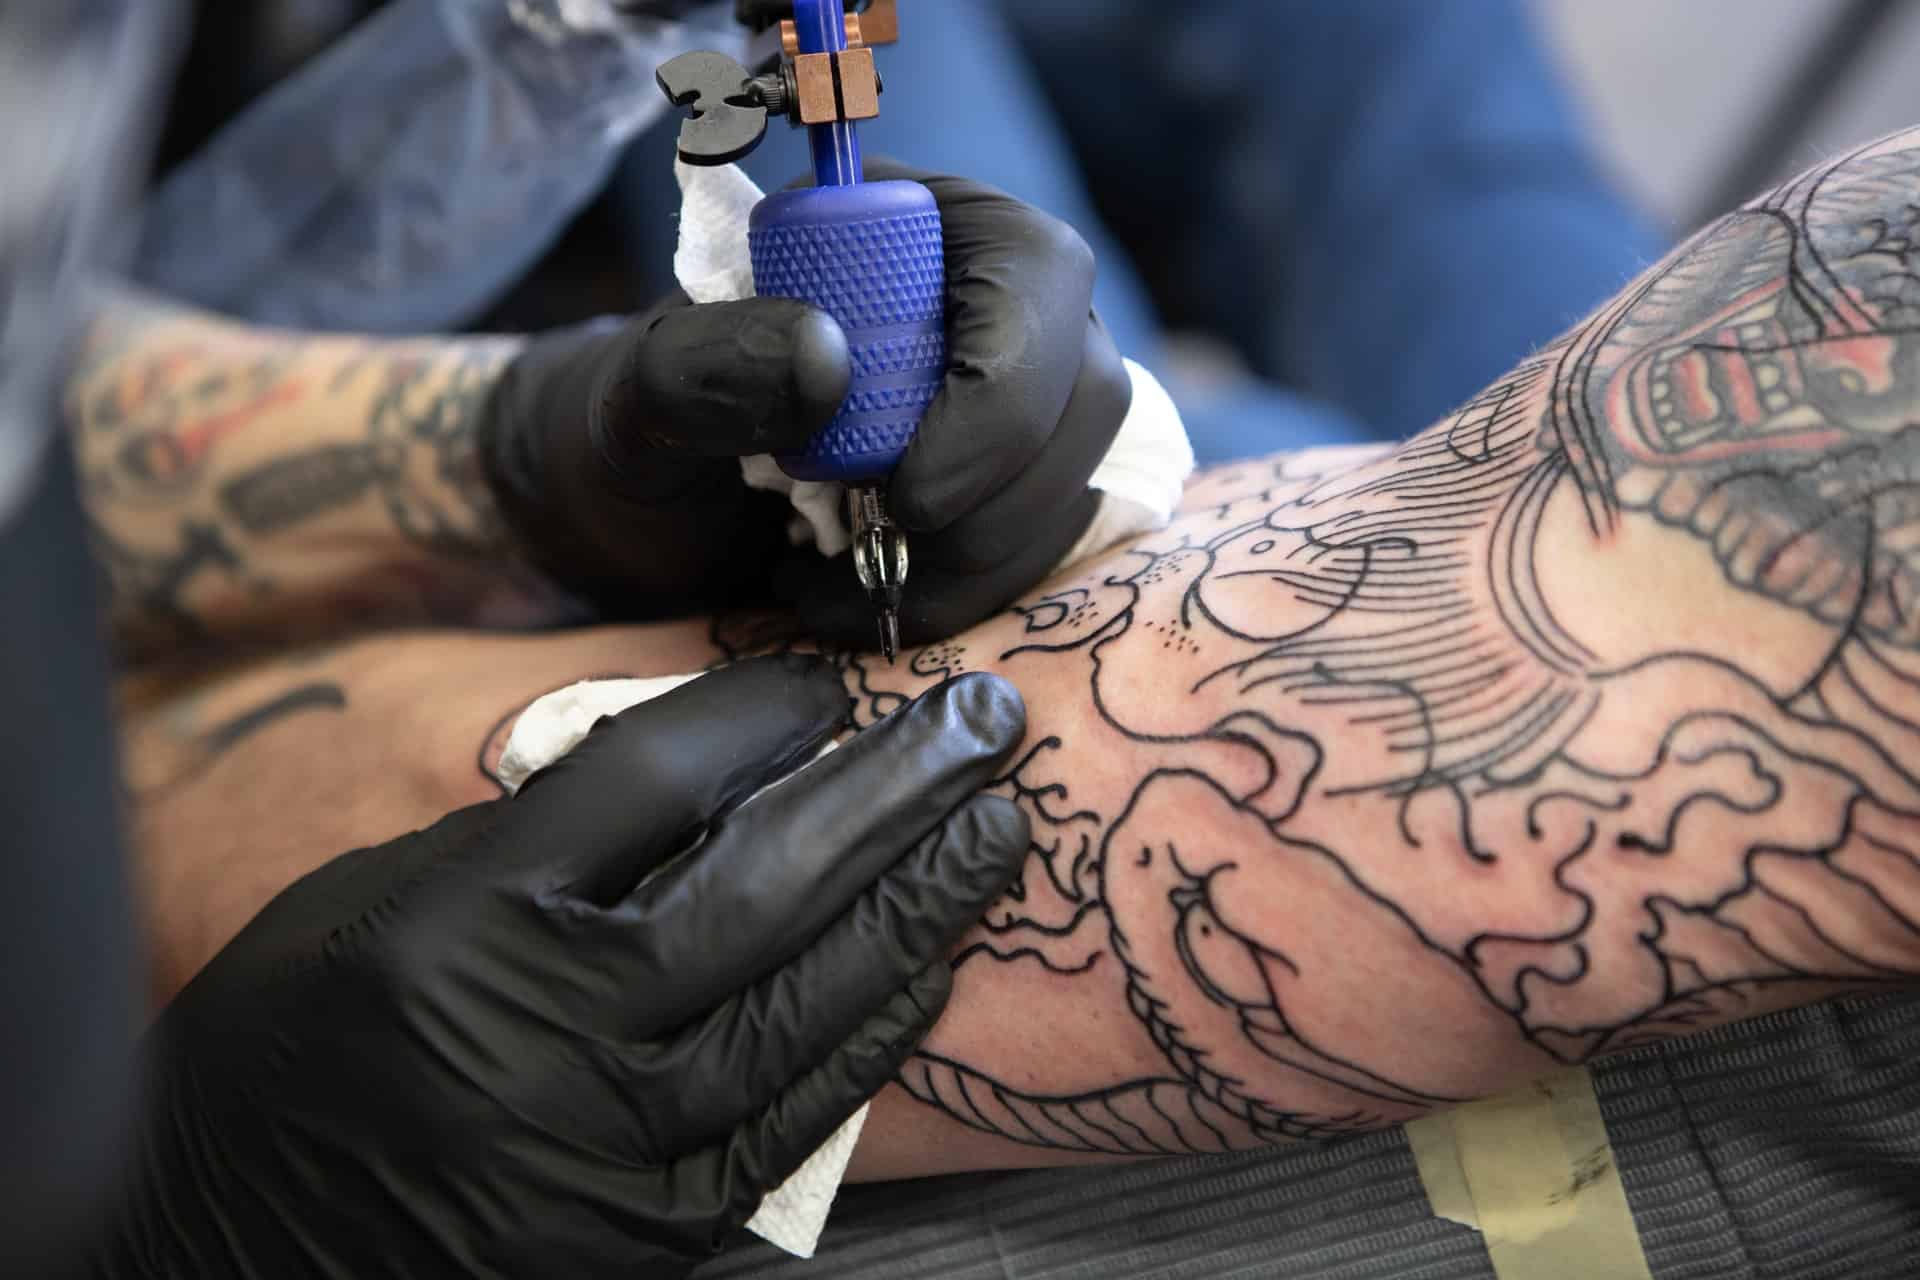 Tattoo Technology Guide Header Image